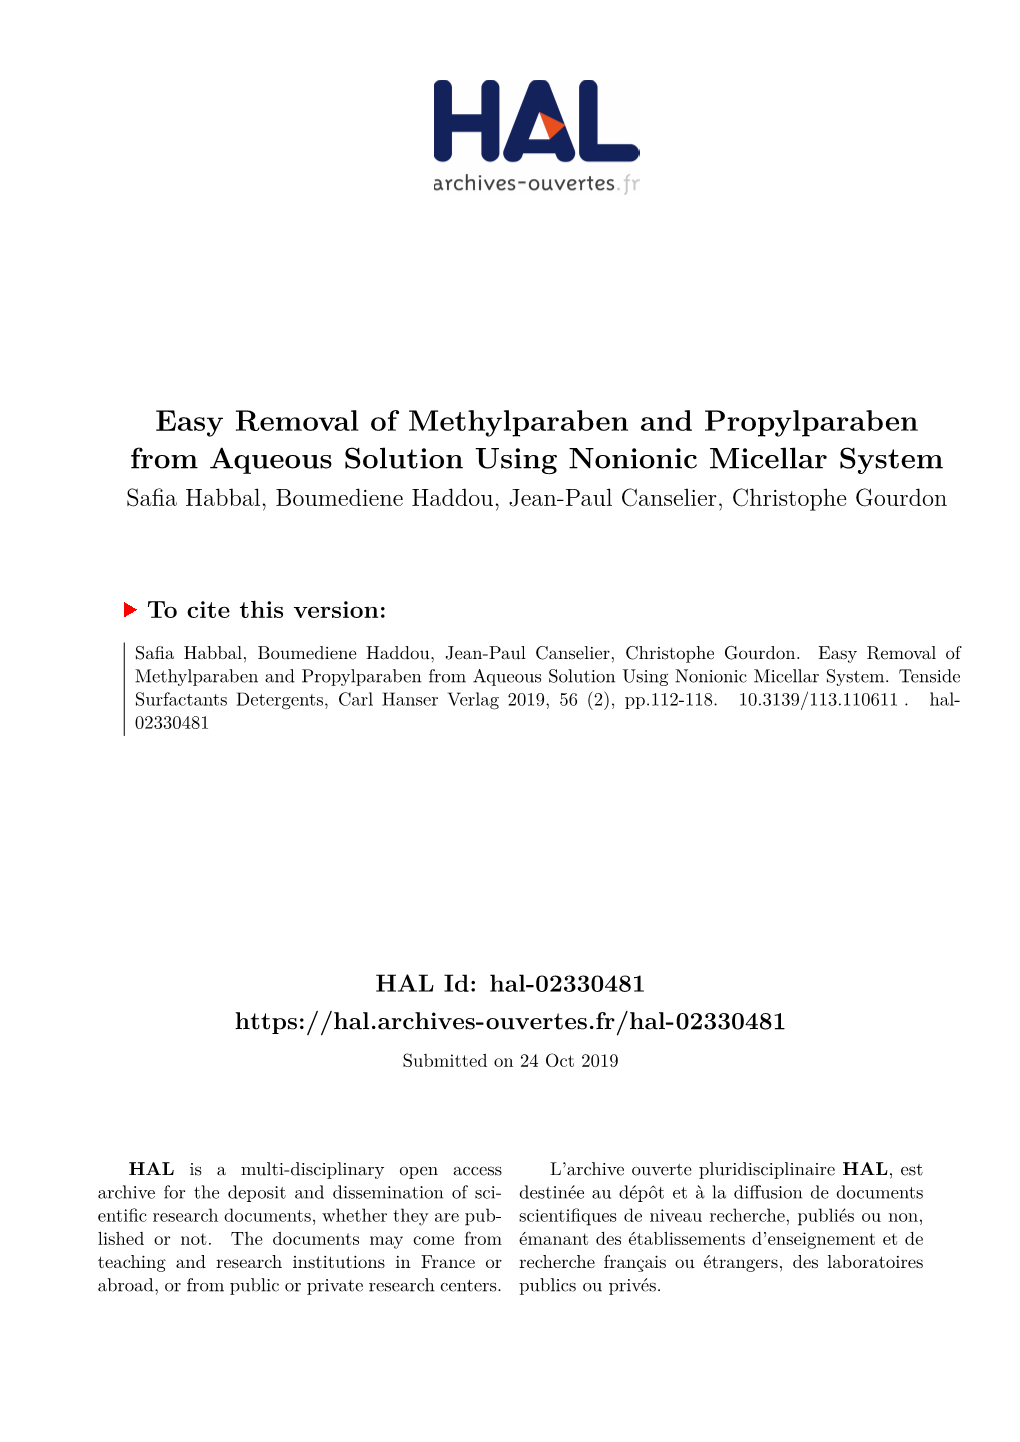 Easy Removal of Methylparaben and Propylparaben from Aqueous